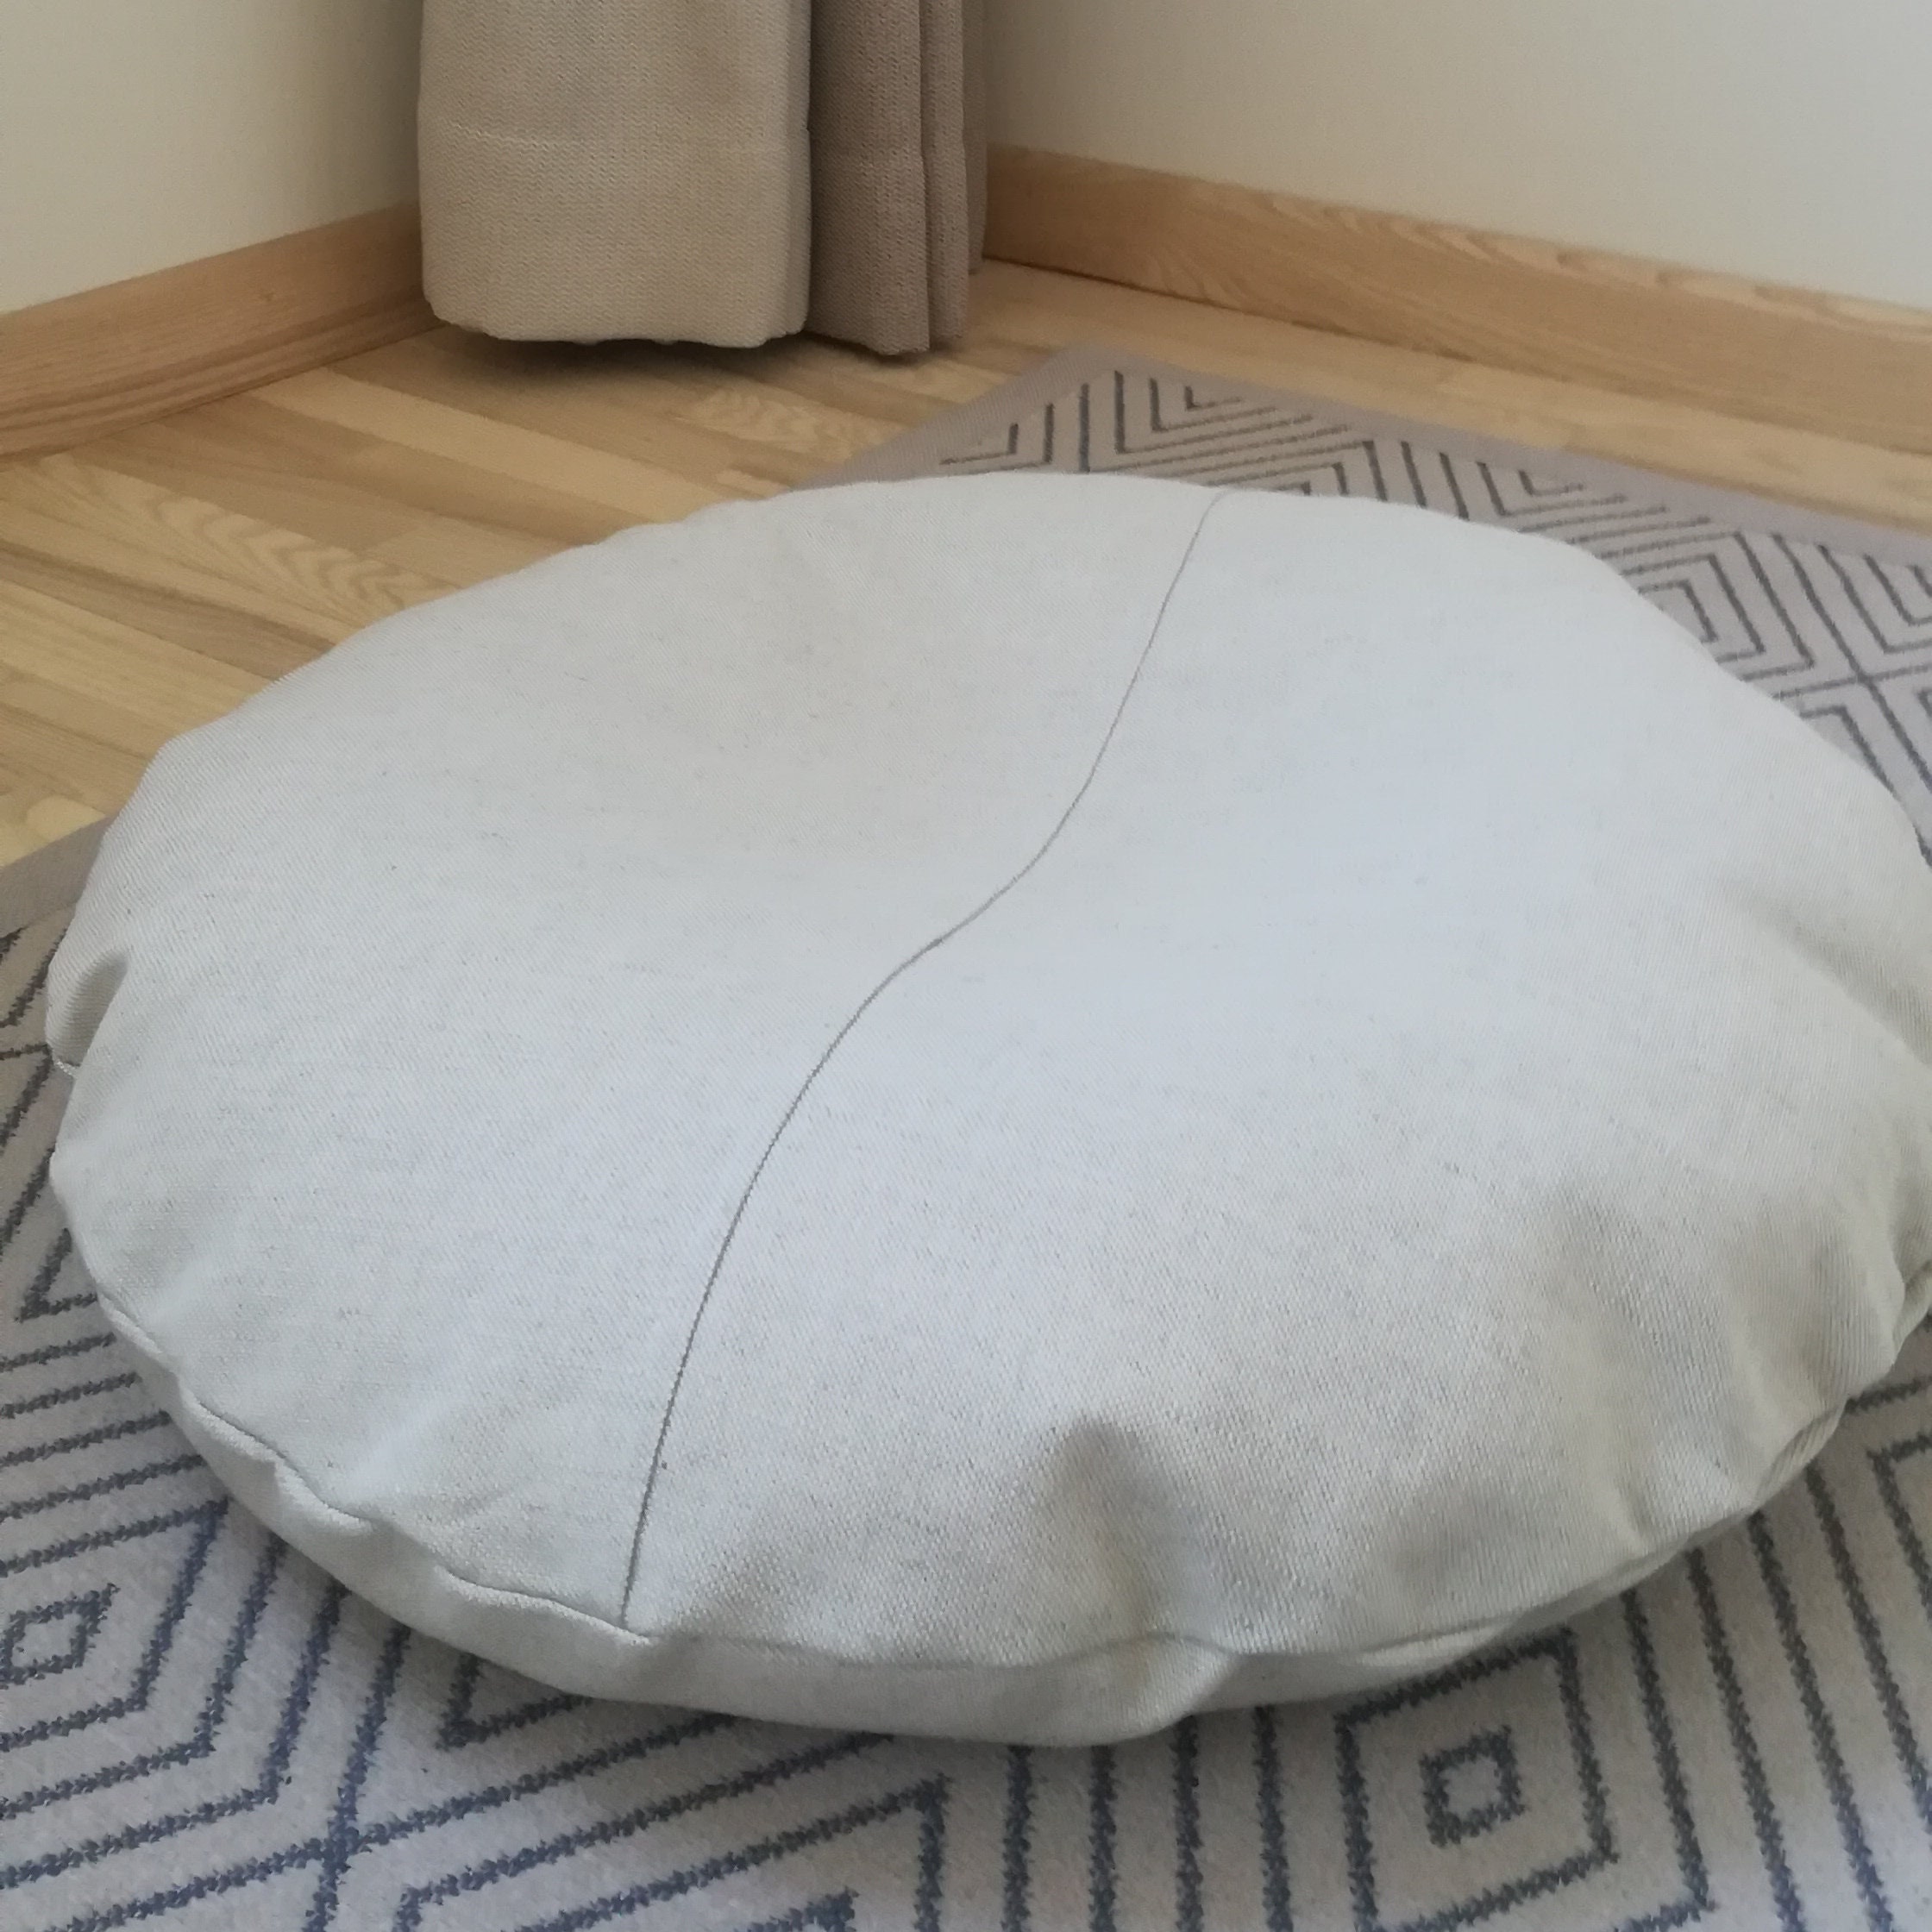 Customizable Foam Insert for Floor Cushion, Designed for a Square